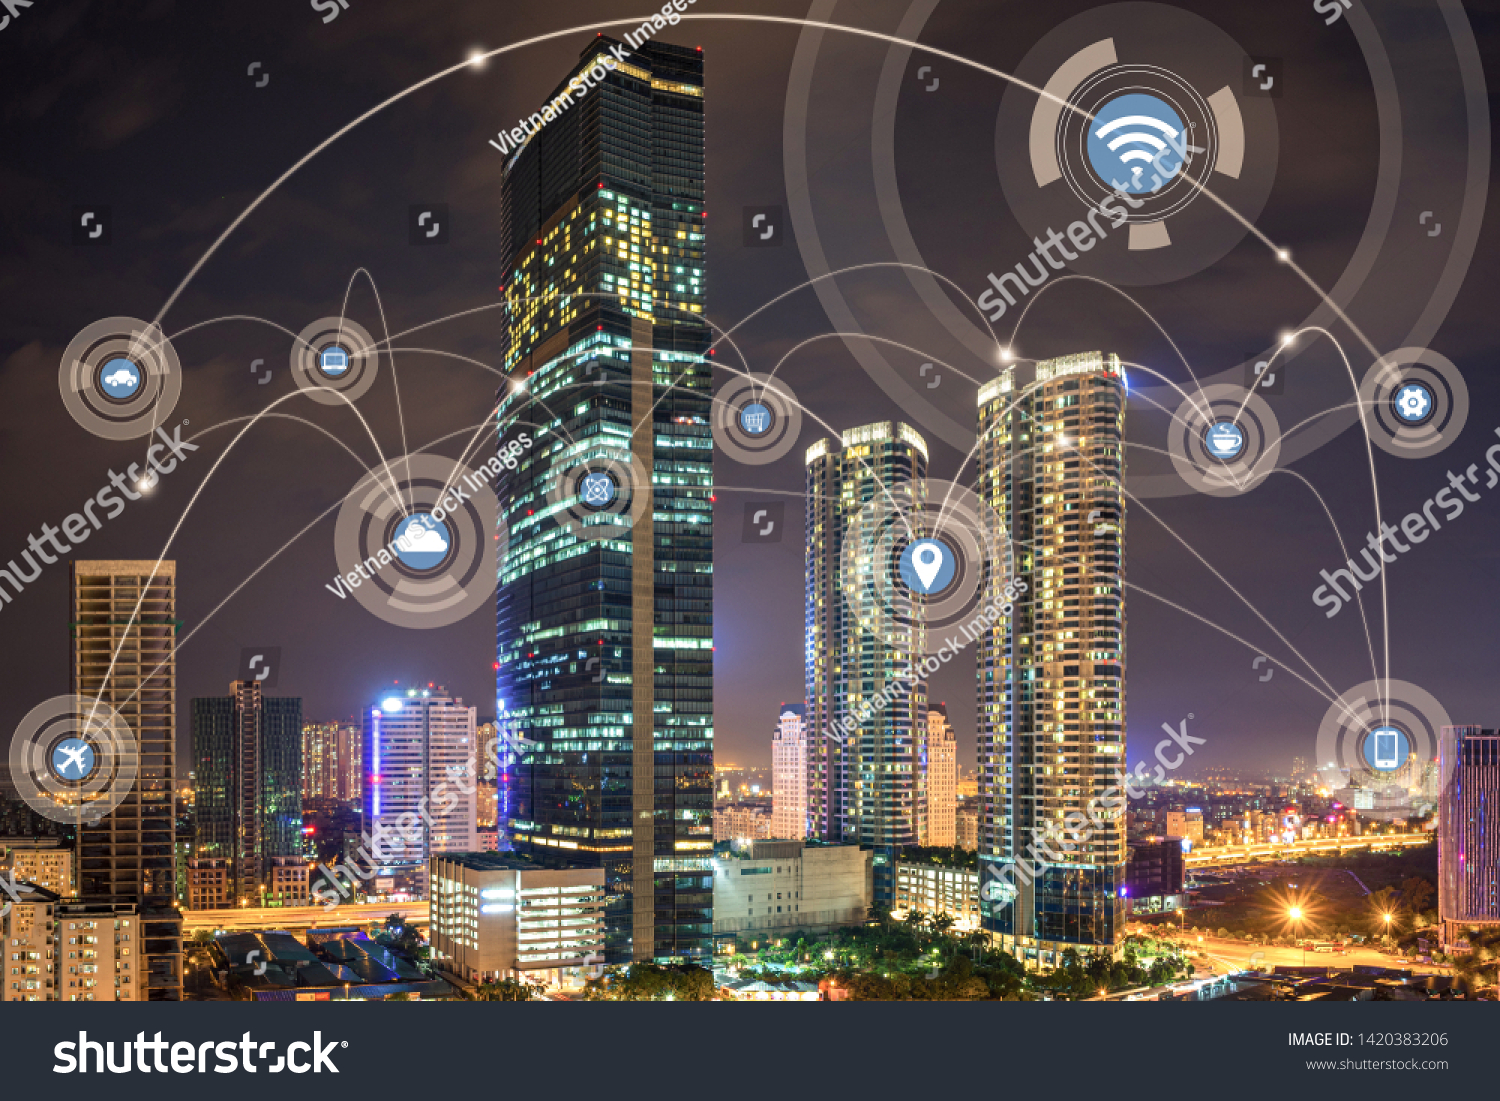 Smart city and wireless communication network concept. Digital network connection lines of Hanoi city #1420383206